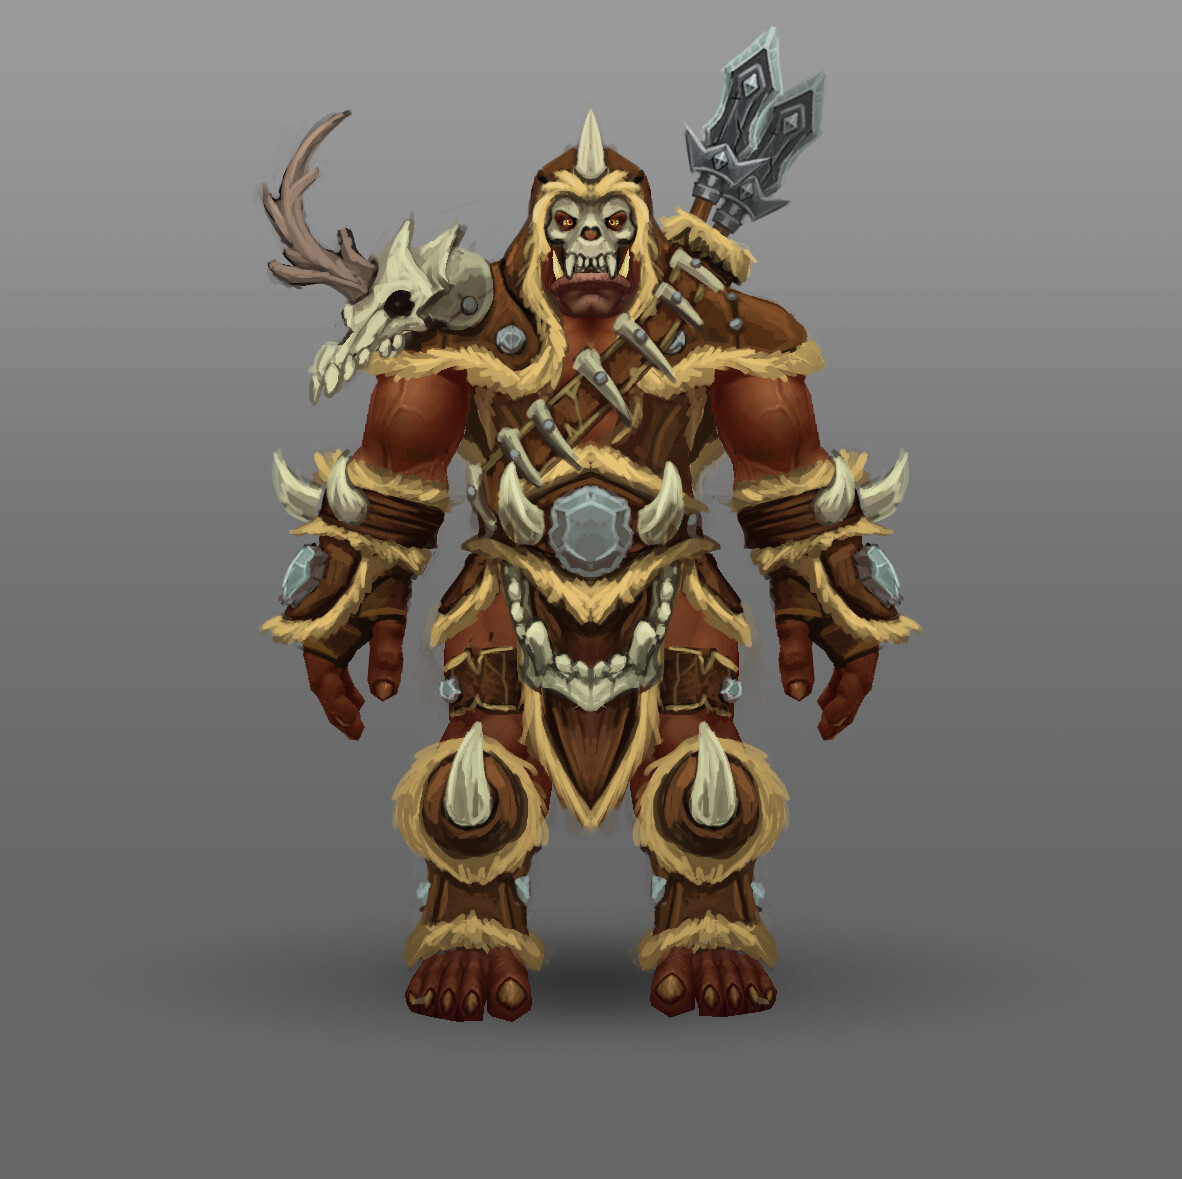 Hunter

This one is based on the Thunderlord Clan. Similar to the Blackrock set, there was a set themed around them already in the game. But with the new tech available since Legion, new ways to design armor are possible.